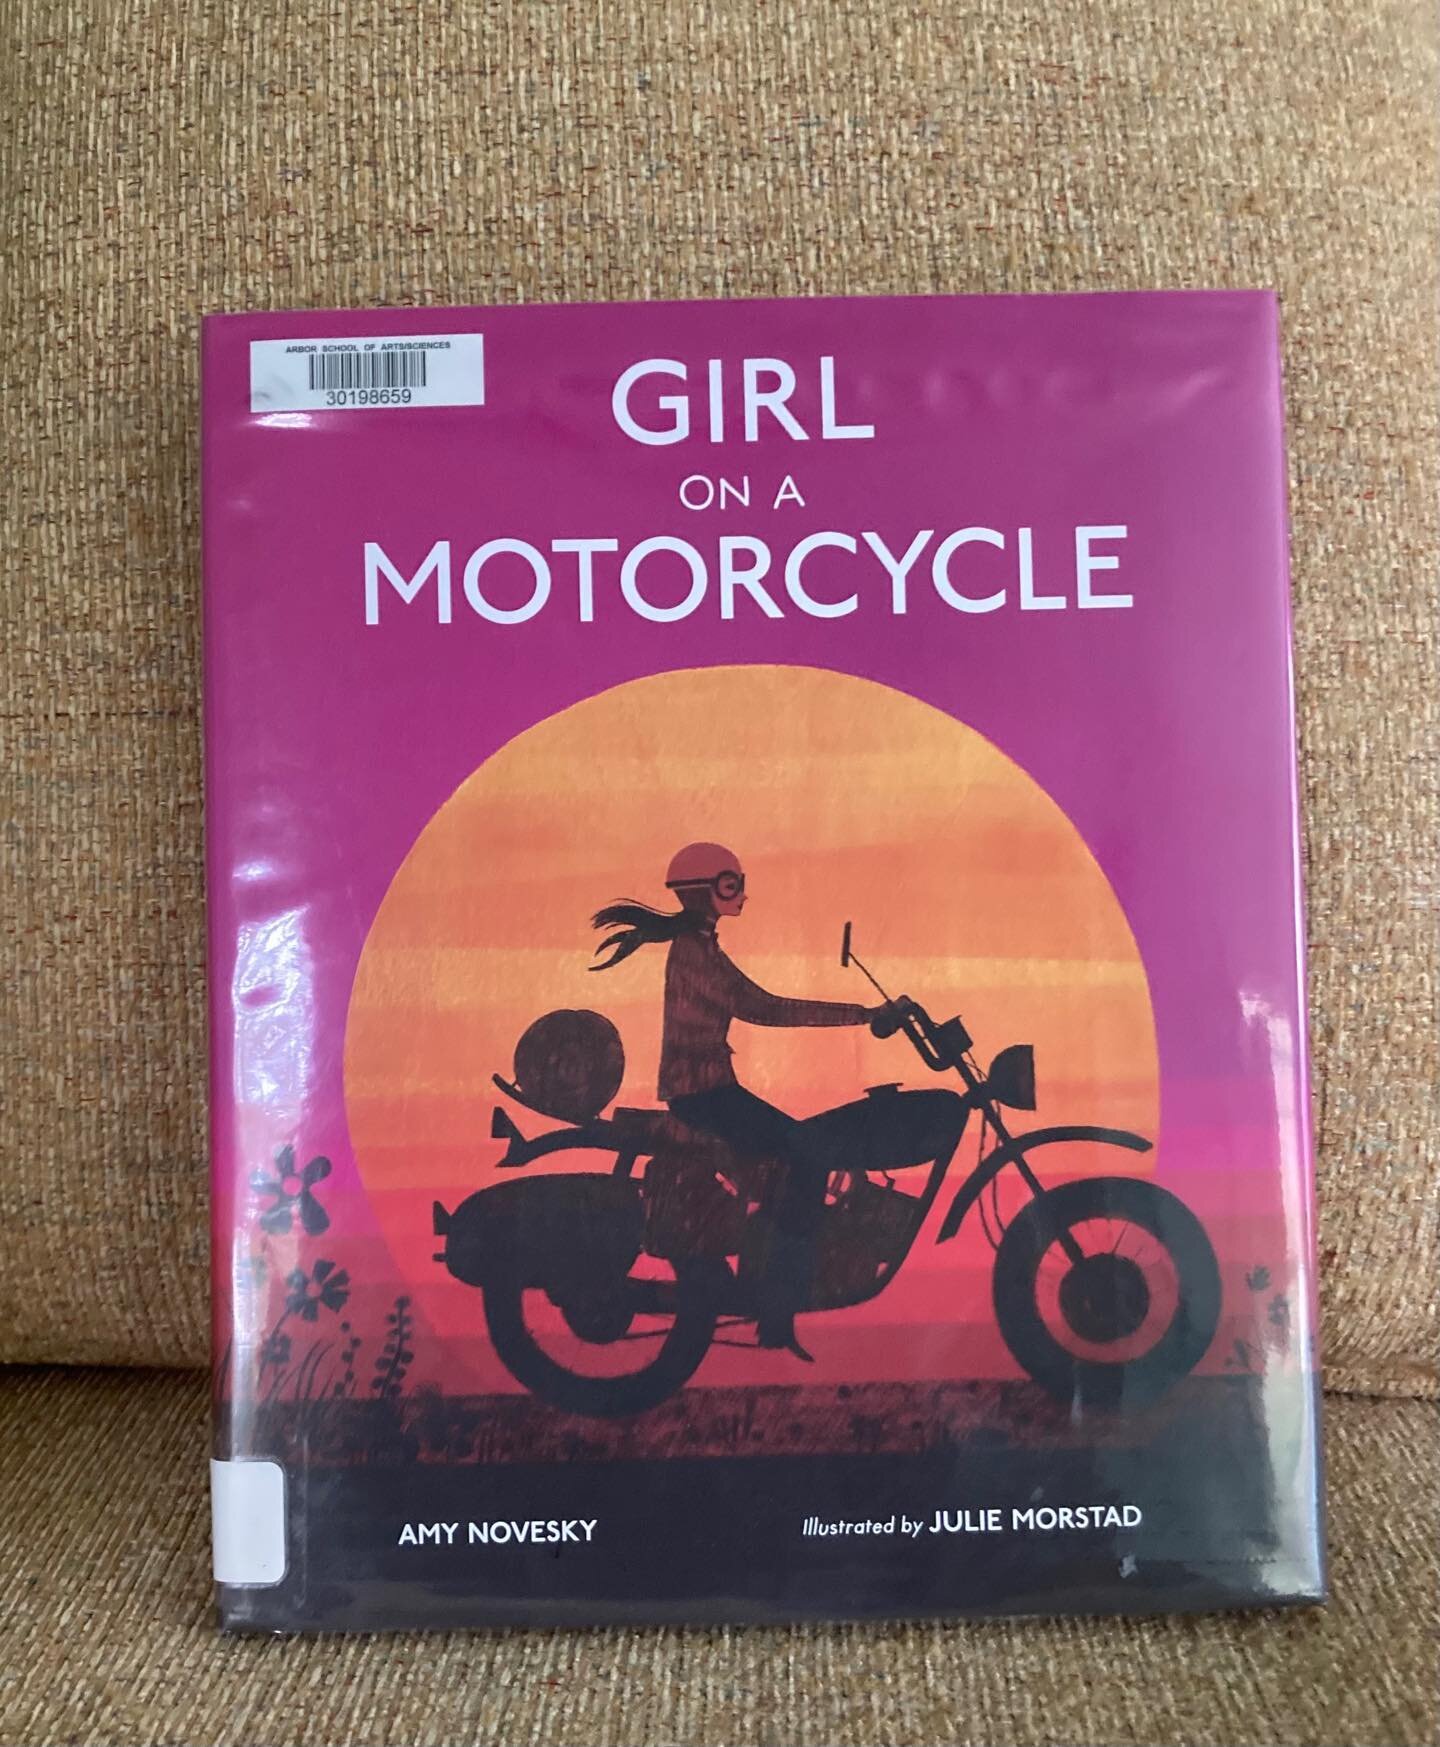 Can&rsquo;t wait to hear what our 2nd &amp; 3rd graders think of this astounding true story of a young French woman who left Paris with her motorcycle to travel the world solo and learned through that journey that &ldquo;The world is beautiful. The w